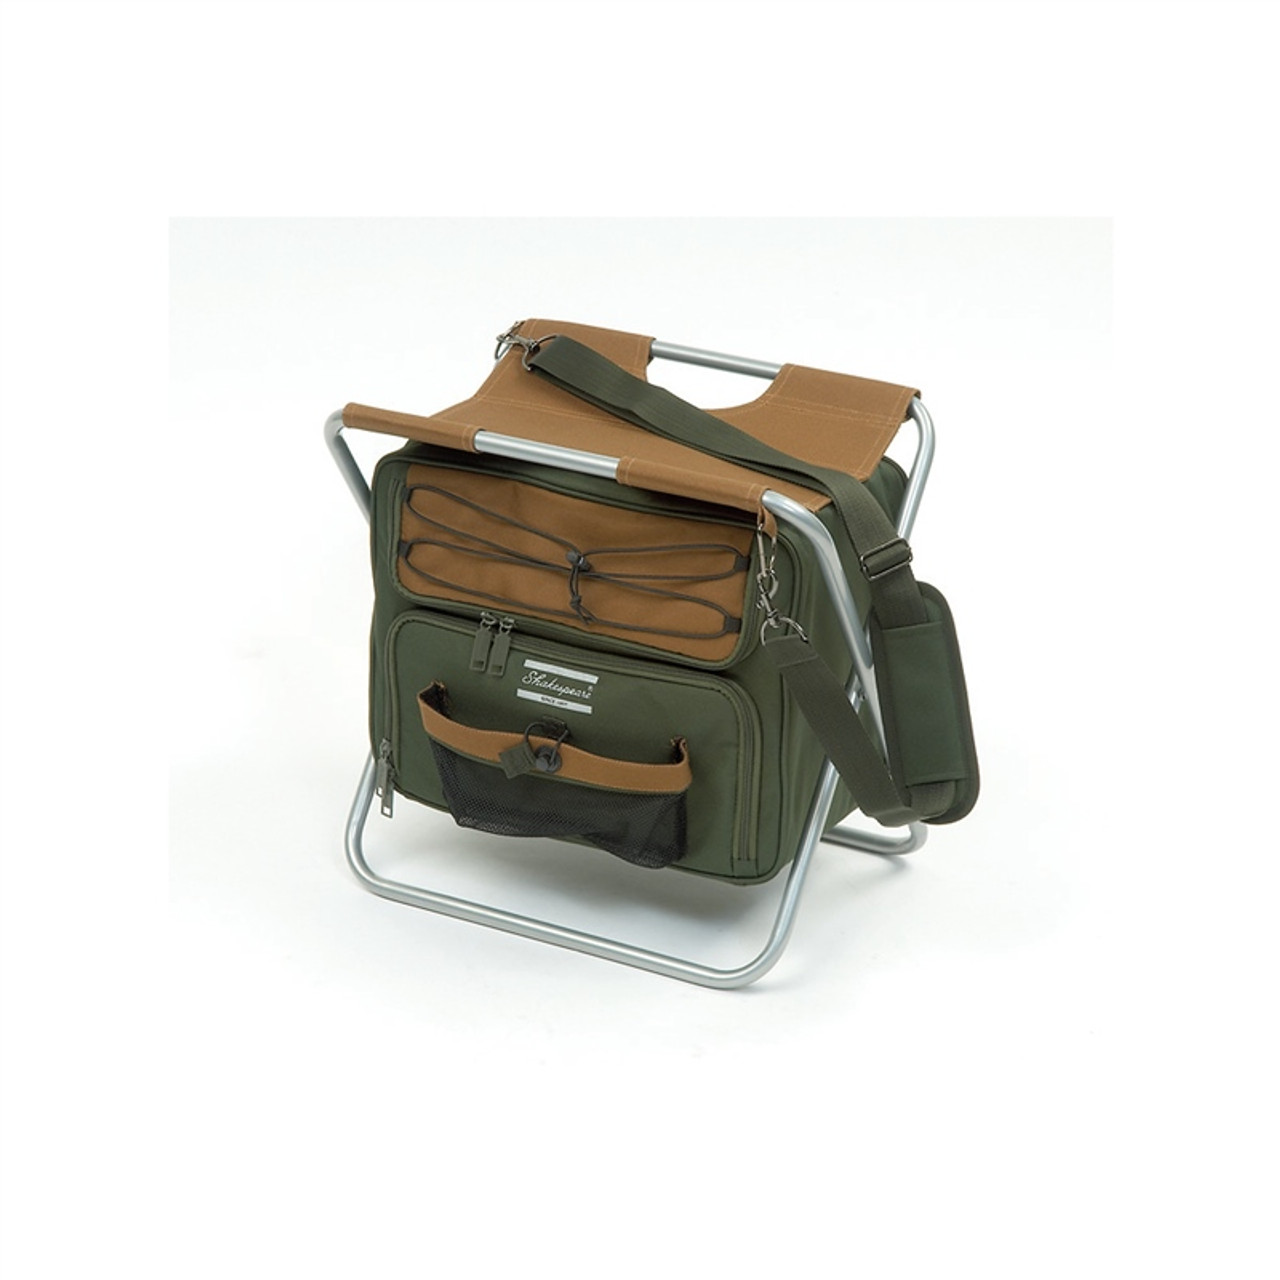 Shakespeare Folding Stool/Cooler Bag- Fishing Accessories - Stools